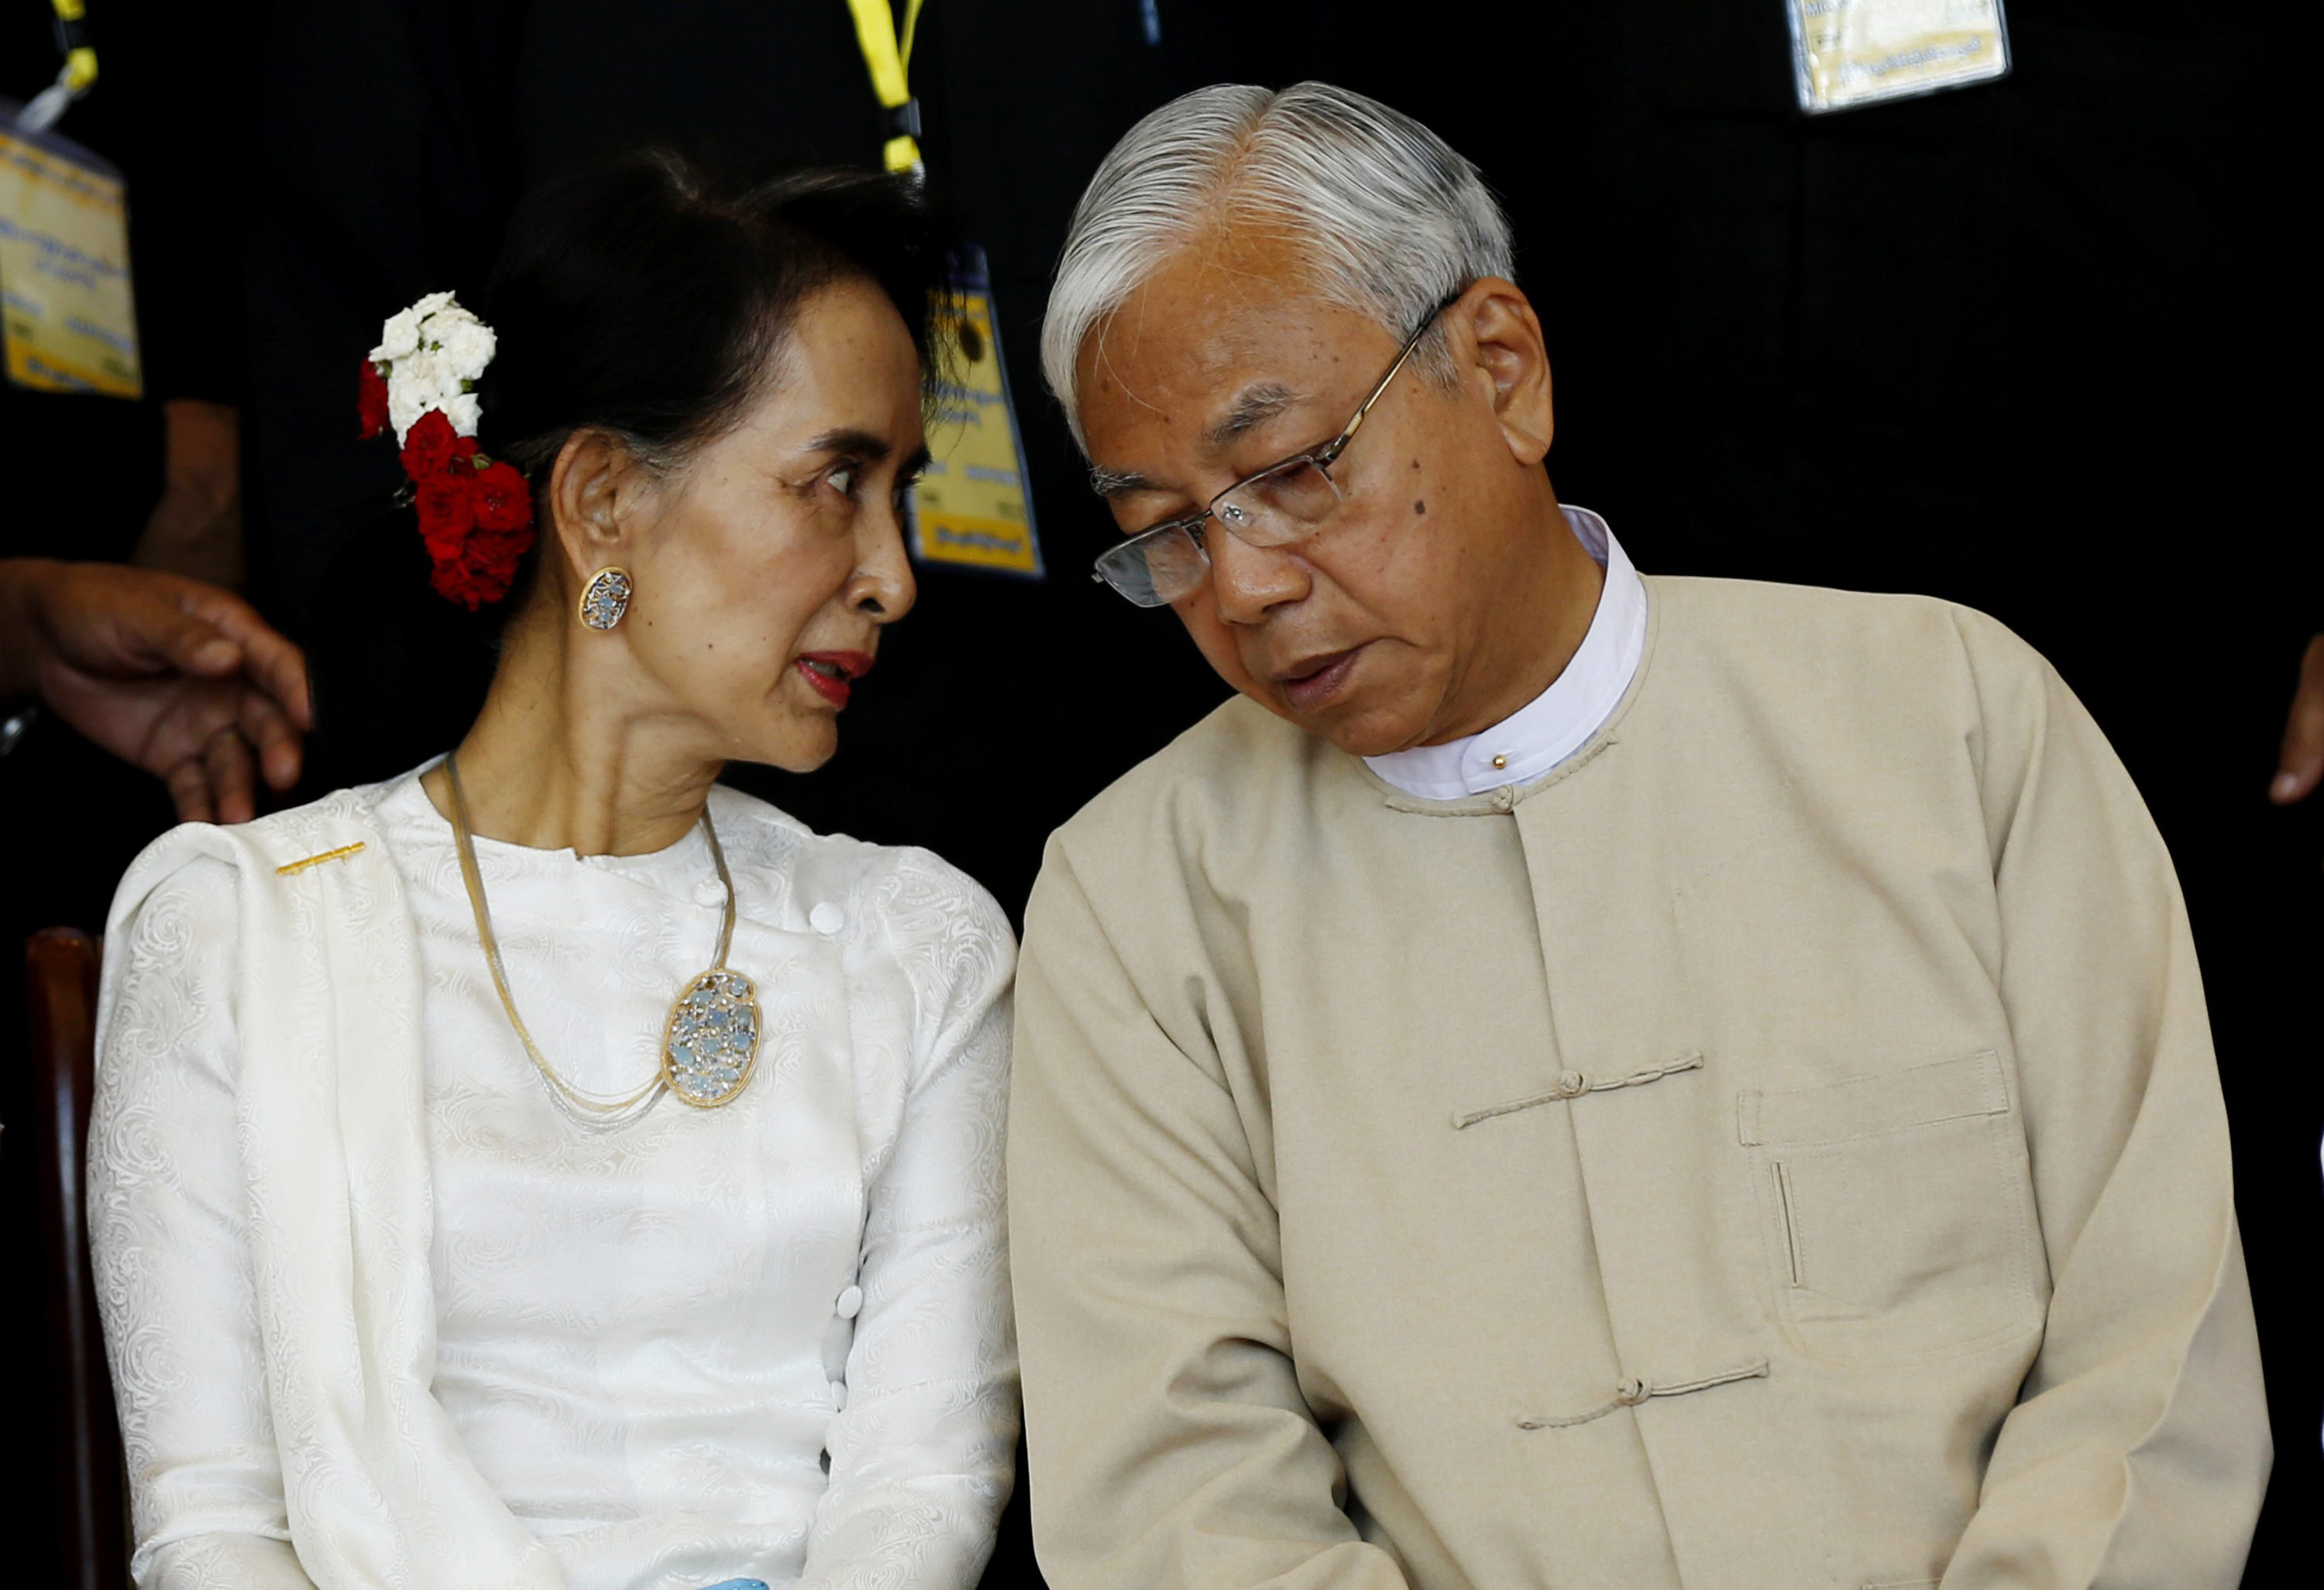 Burmese President Htin Kyaw, right, talks with State Counselor Aung San Suu Kyi during the 21st Century Panglong Peace Conference in Naypyidaw on Aug. 31, 2016 (Xinhua—Sipa USA)